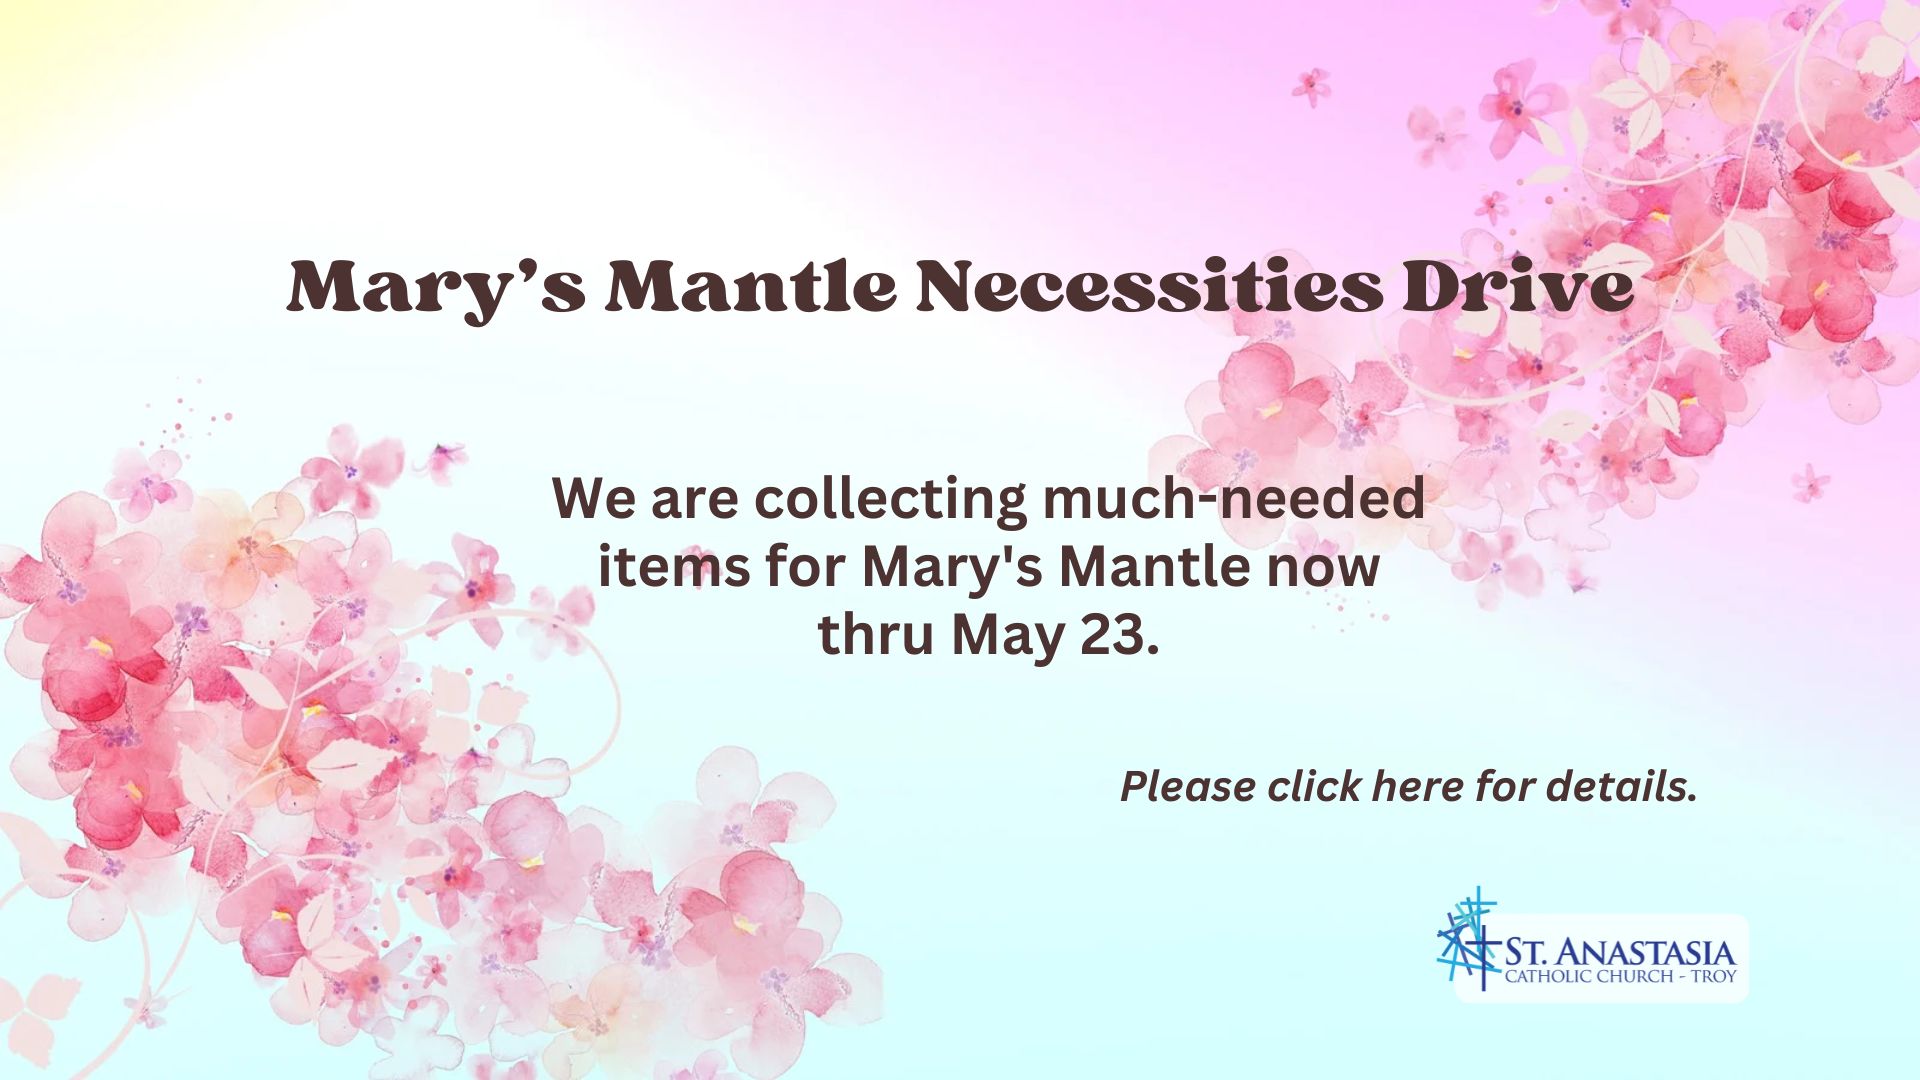 Mary’s Mantle Necessities Drive